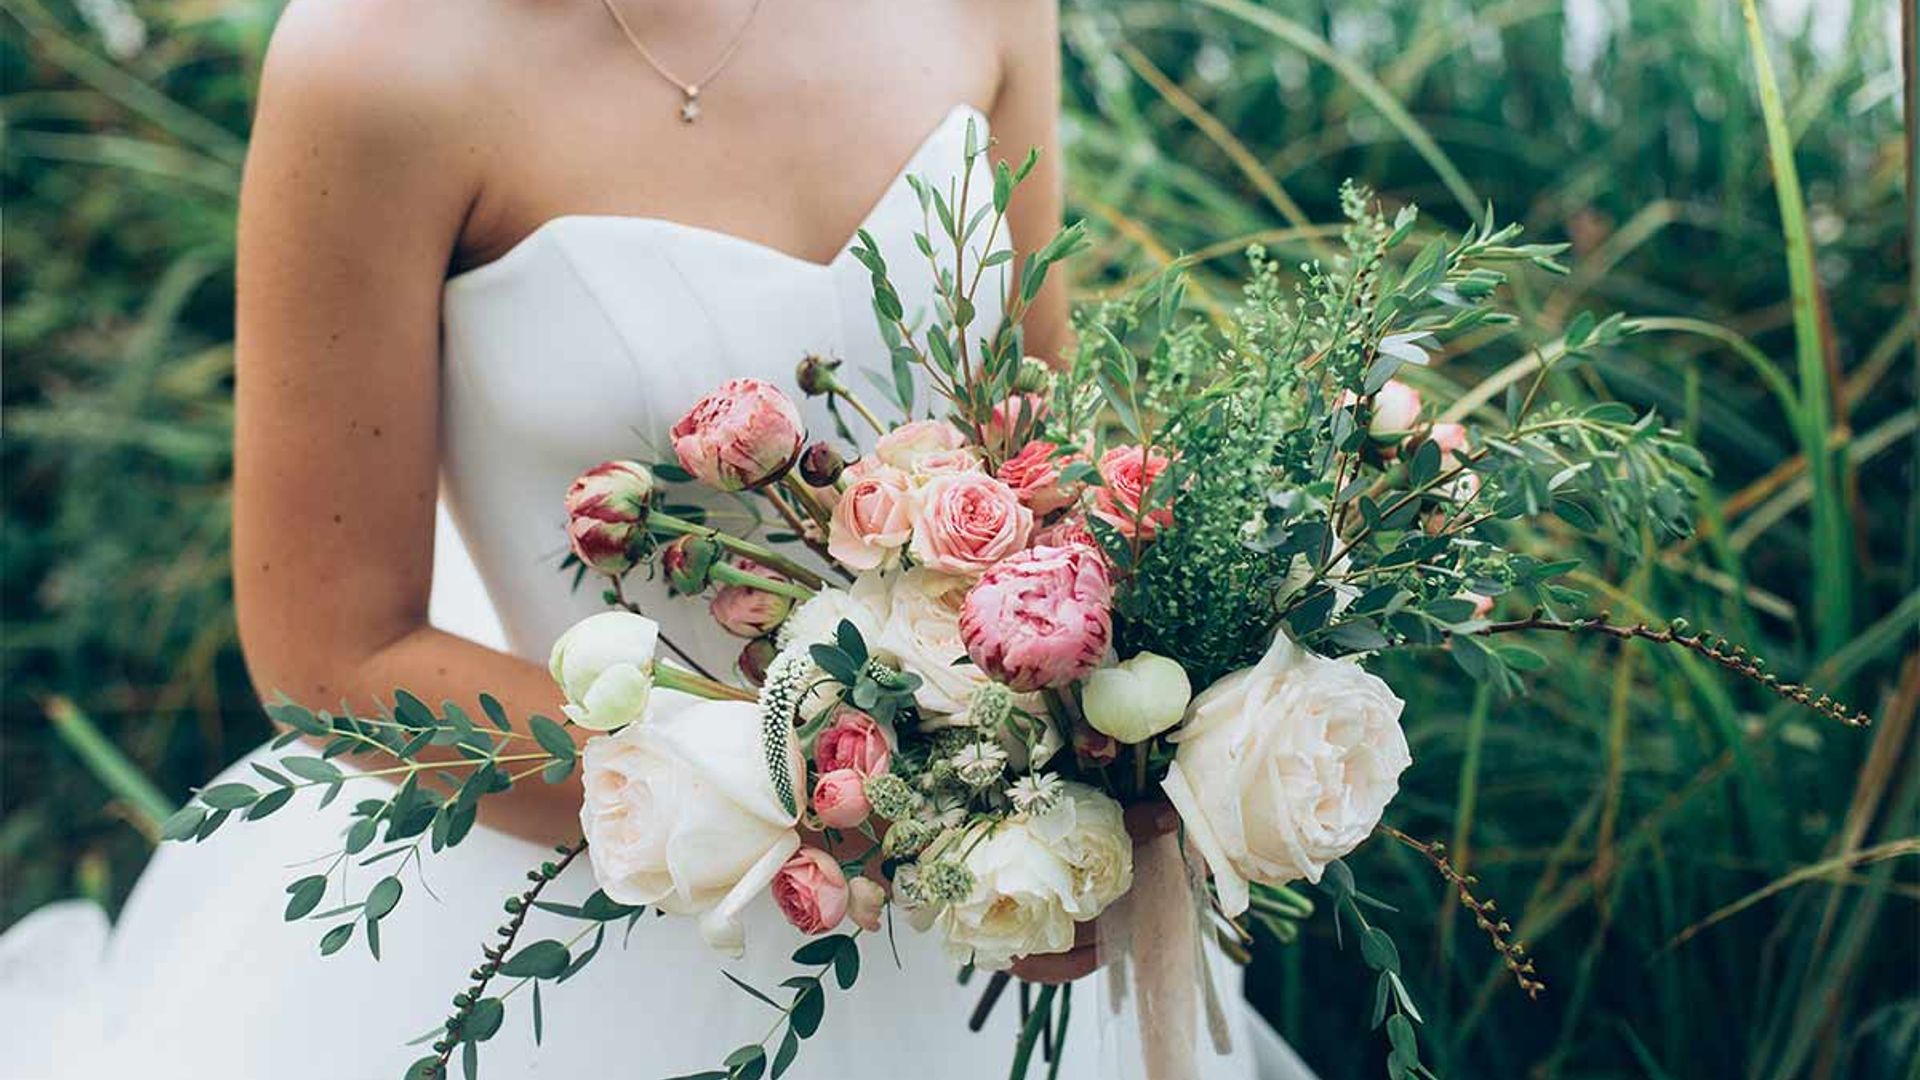 The 2019 wedding flower trends you need to know